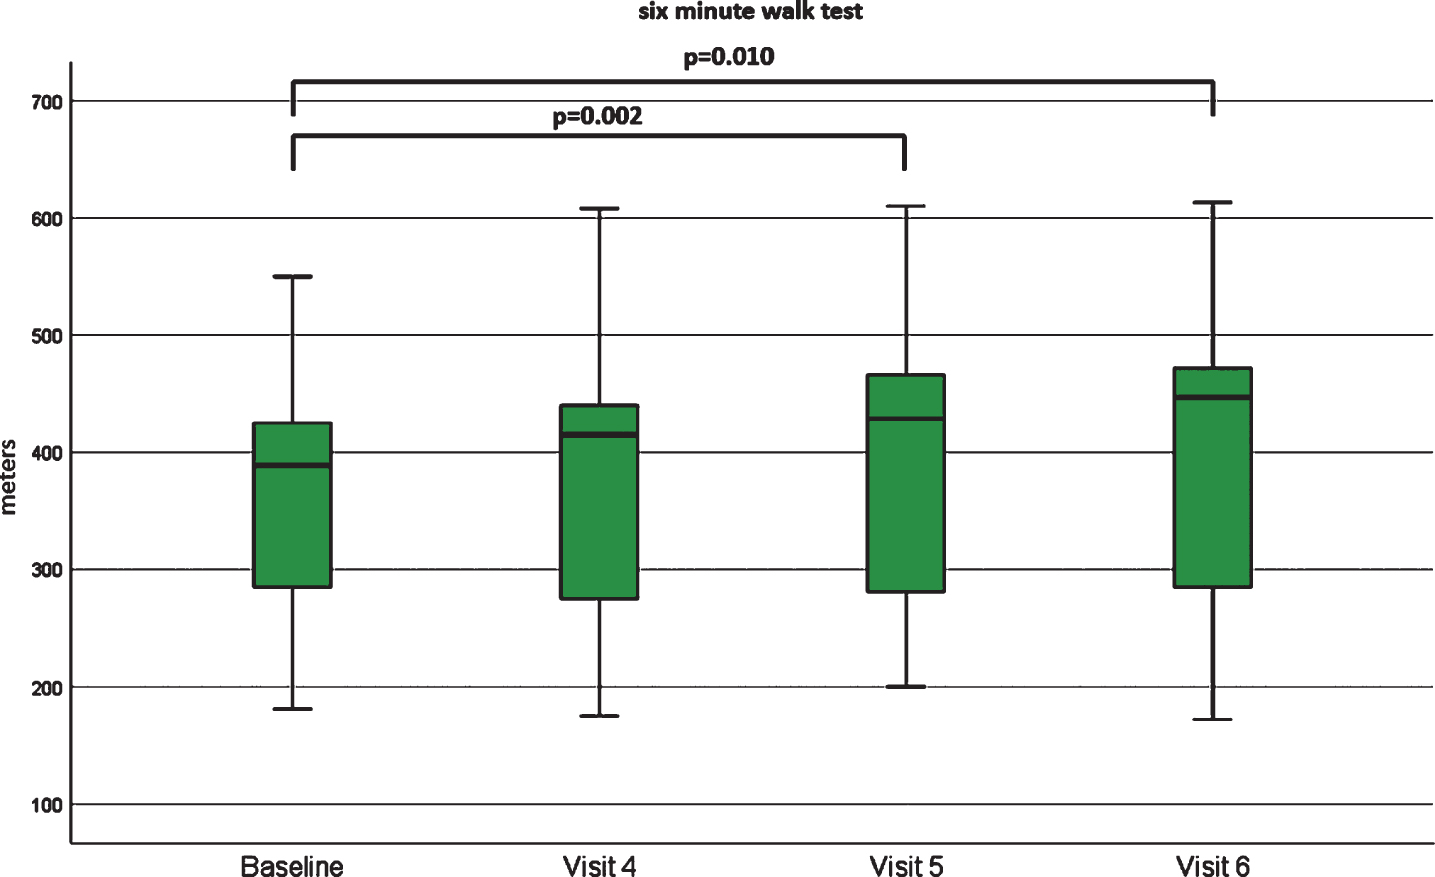 Boxplot 6MWT [meters]. Boxplots of the 6MWT at baseline, visit 4, visit 5 and visit 6. There were statistically significant differences between baseline compared to visit 5 and visit 6.